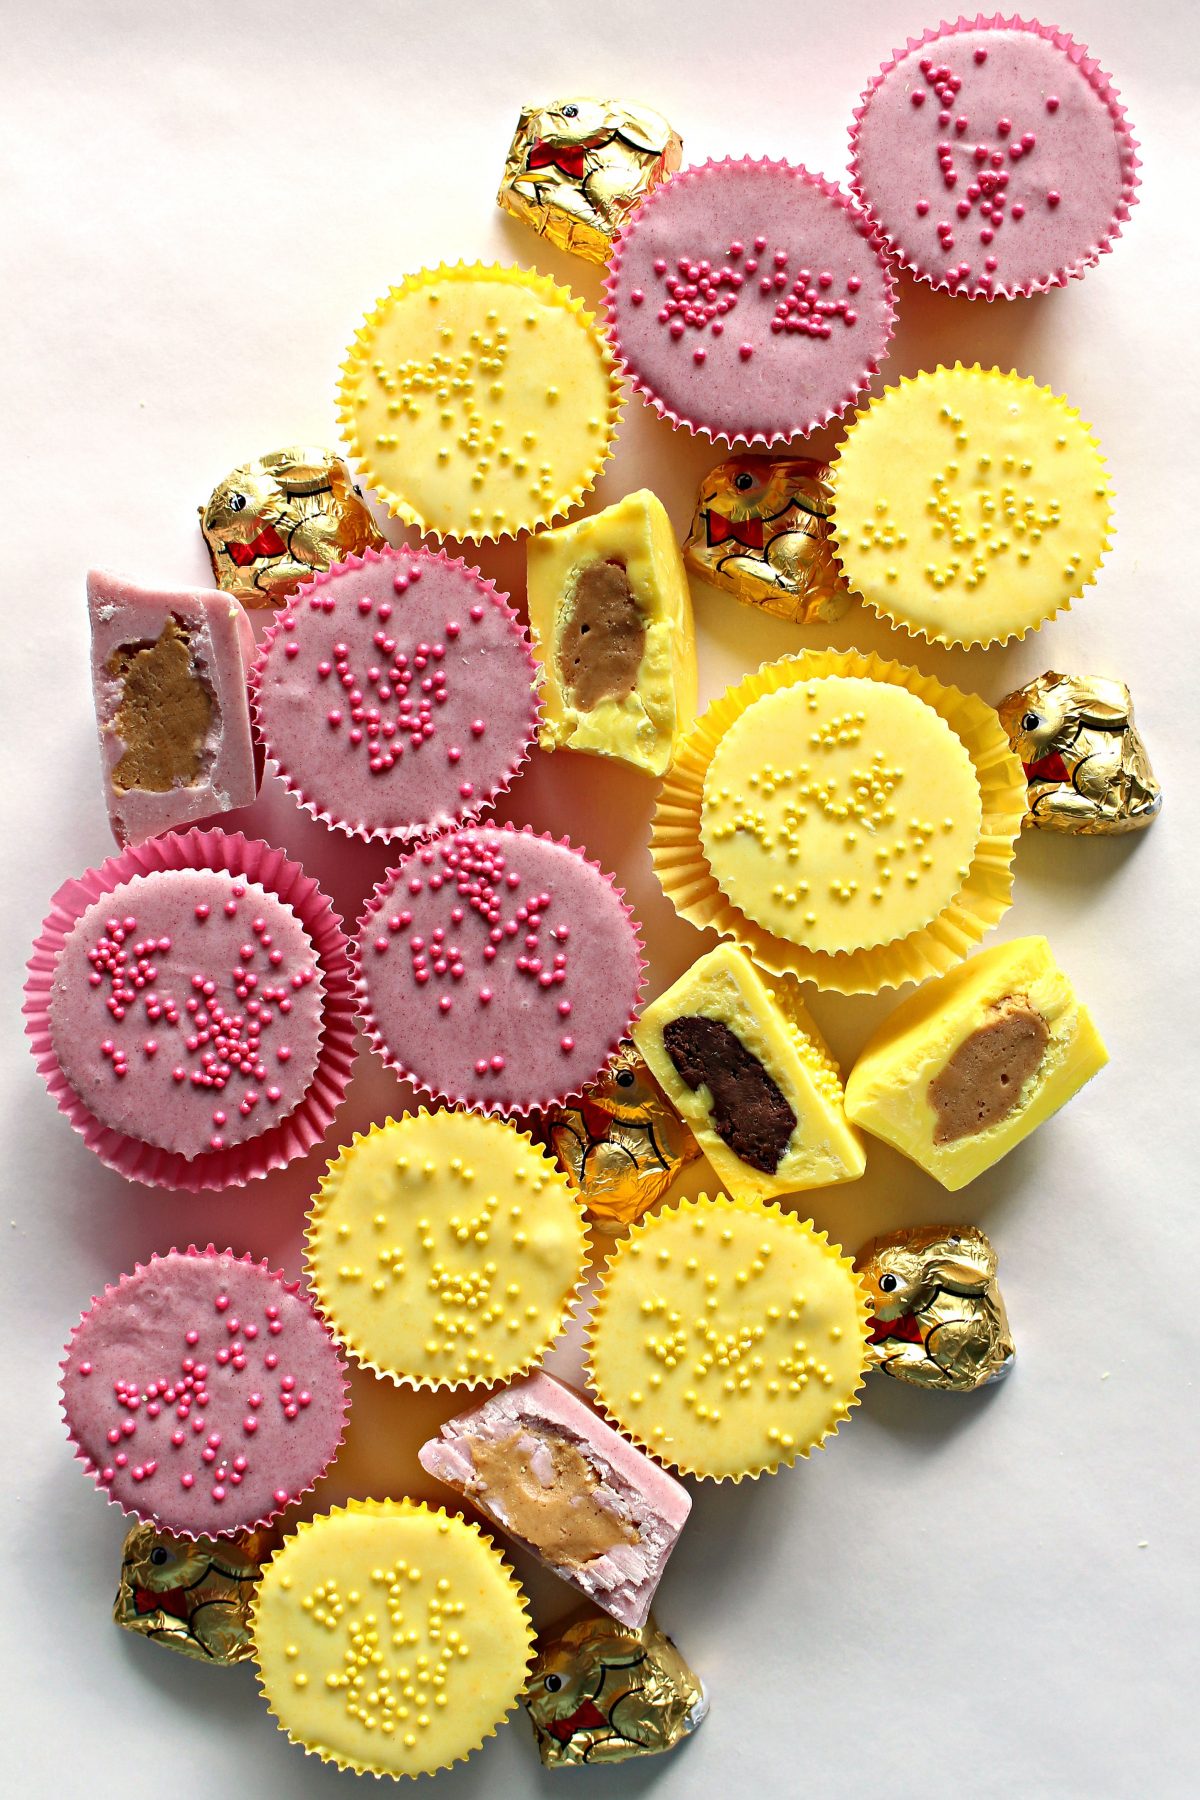 Yellow and pink peanut butter cups with matching sprinkles.